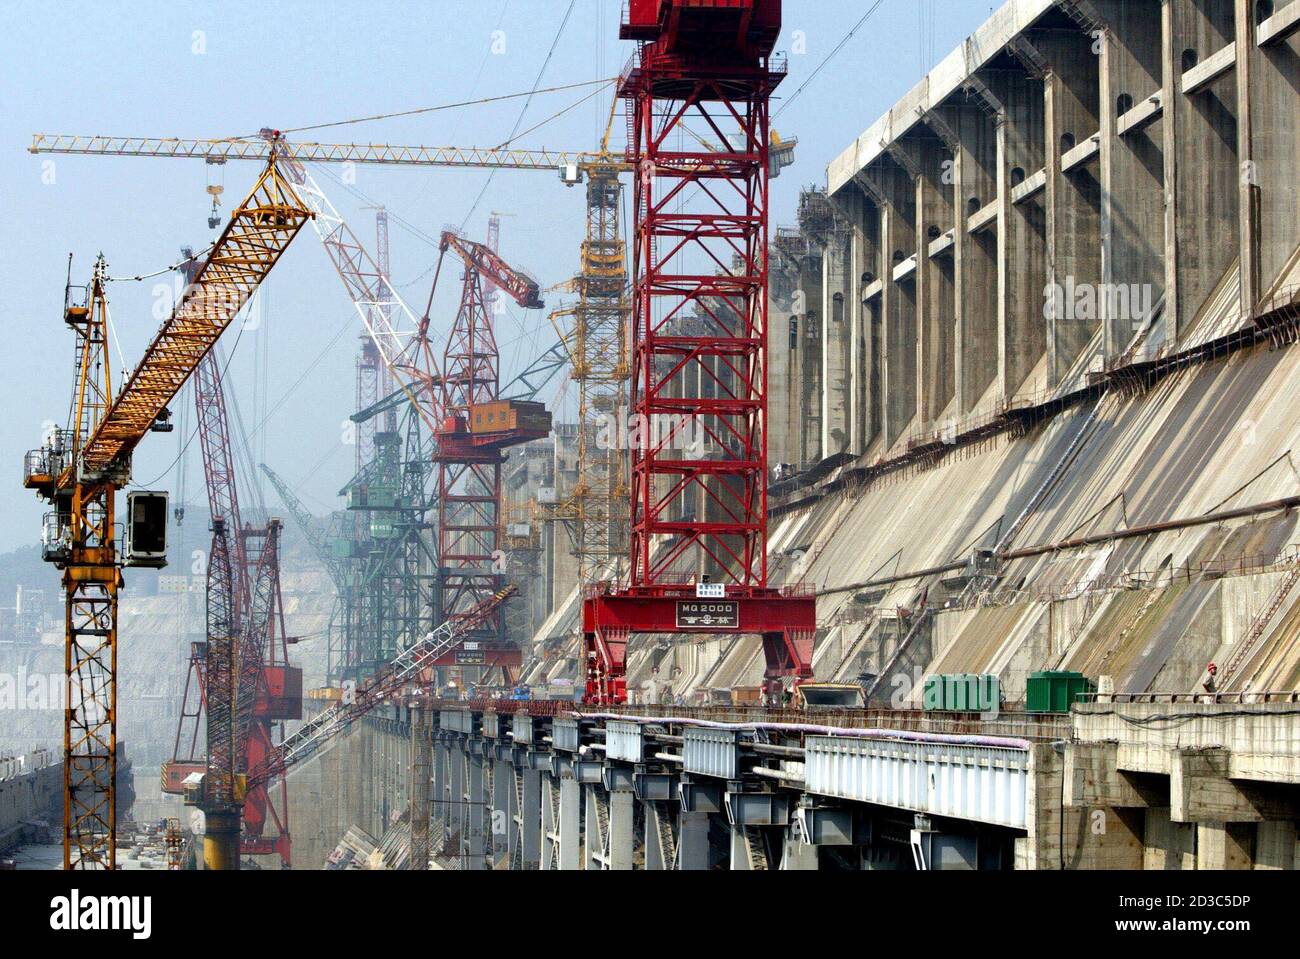 PHOTO TAKEN 29AUG02- Construction cranes line the main dam of the Three  Gorges Dam Project on the Yangtze River in Yichang, China's Hubei province,  August 29, 2002. [The project, which aims to